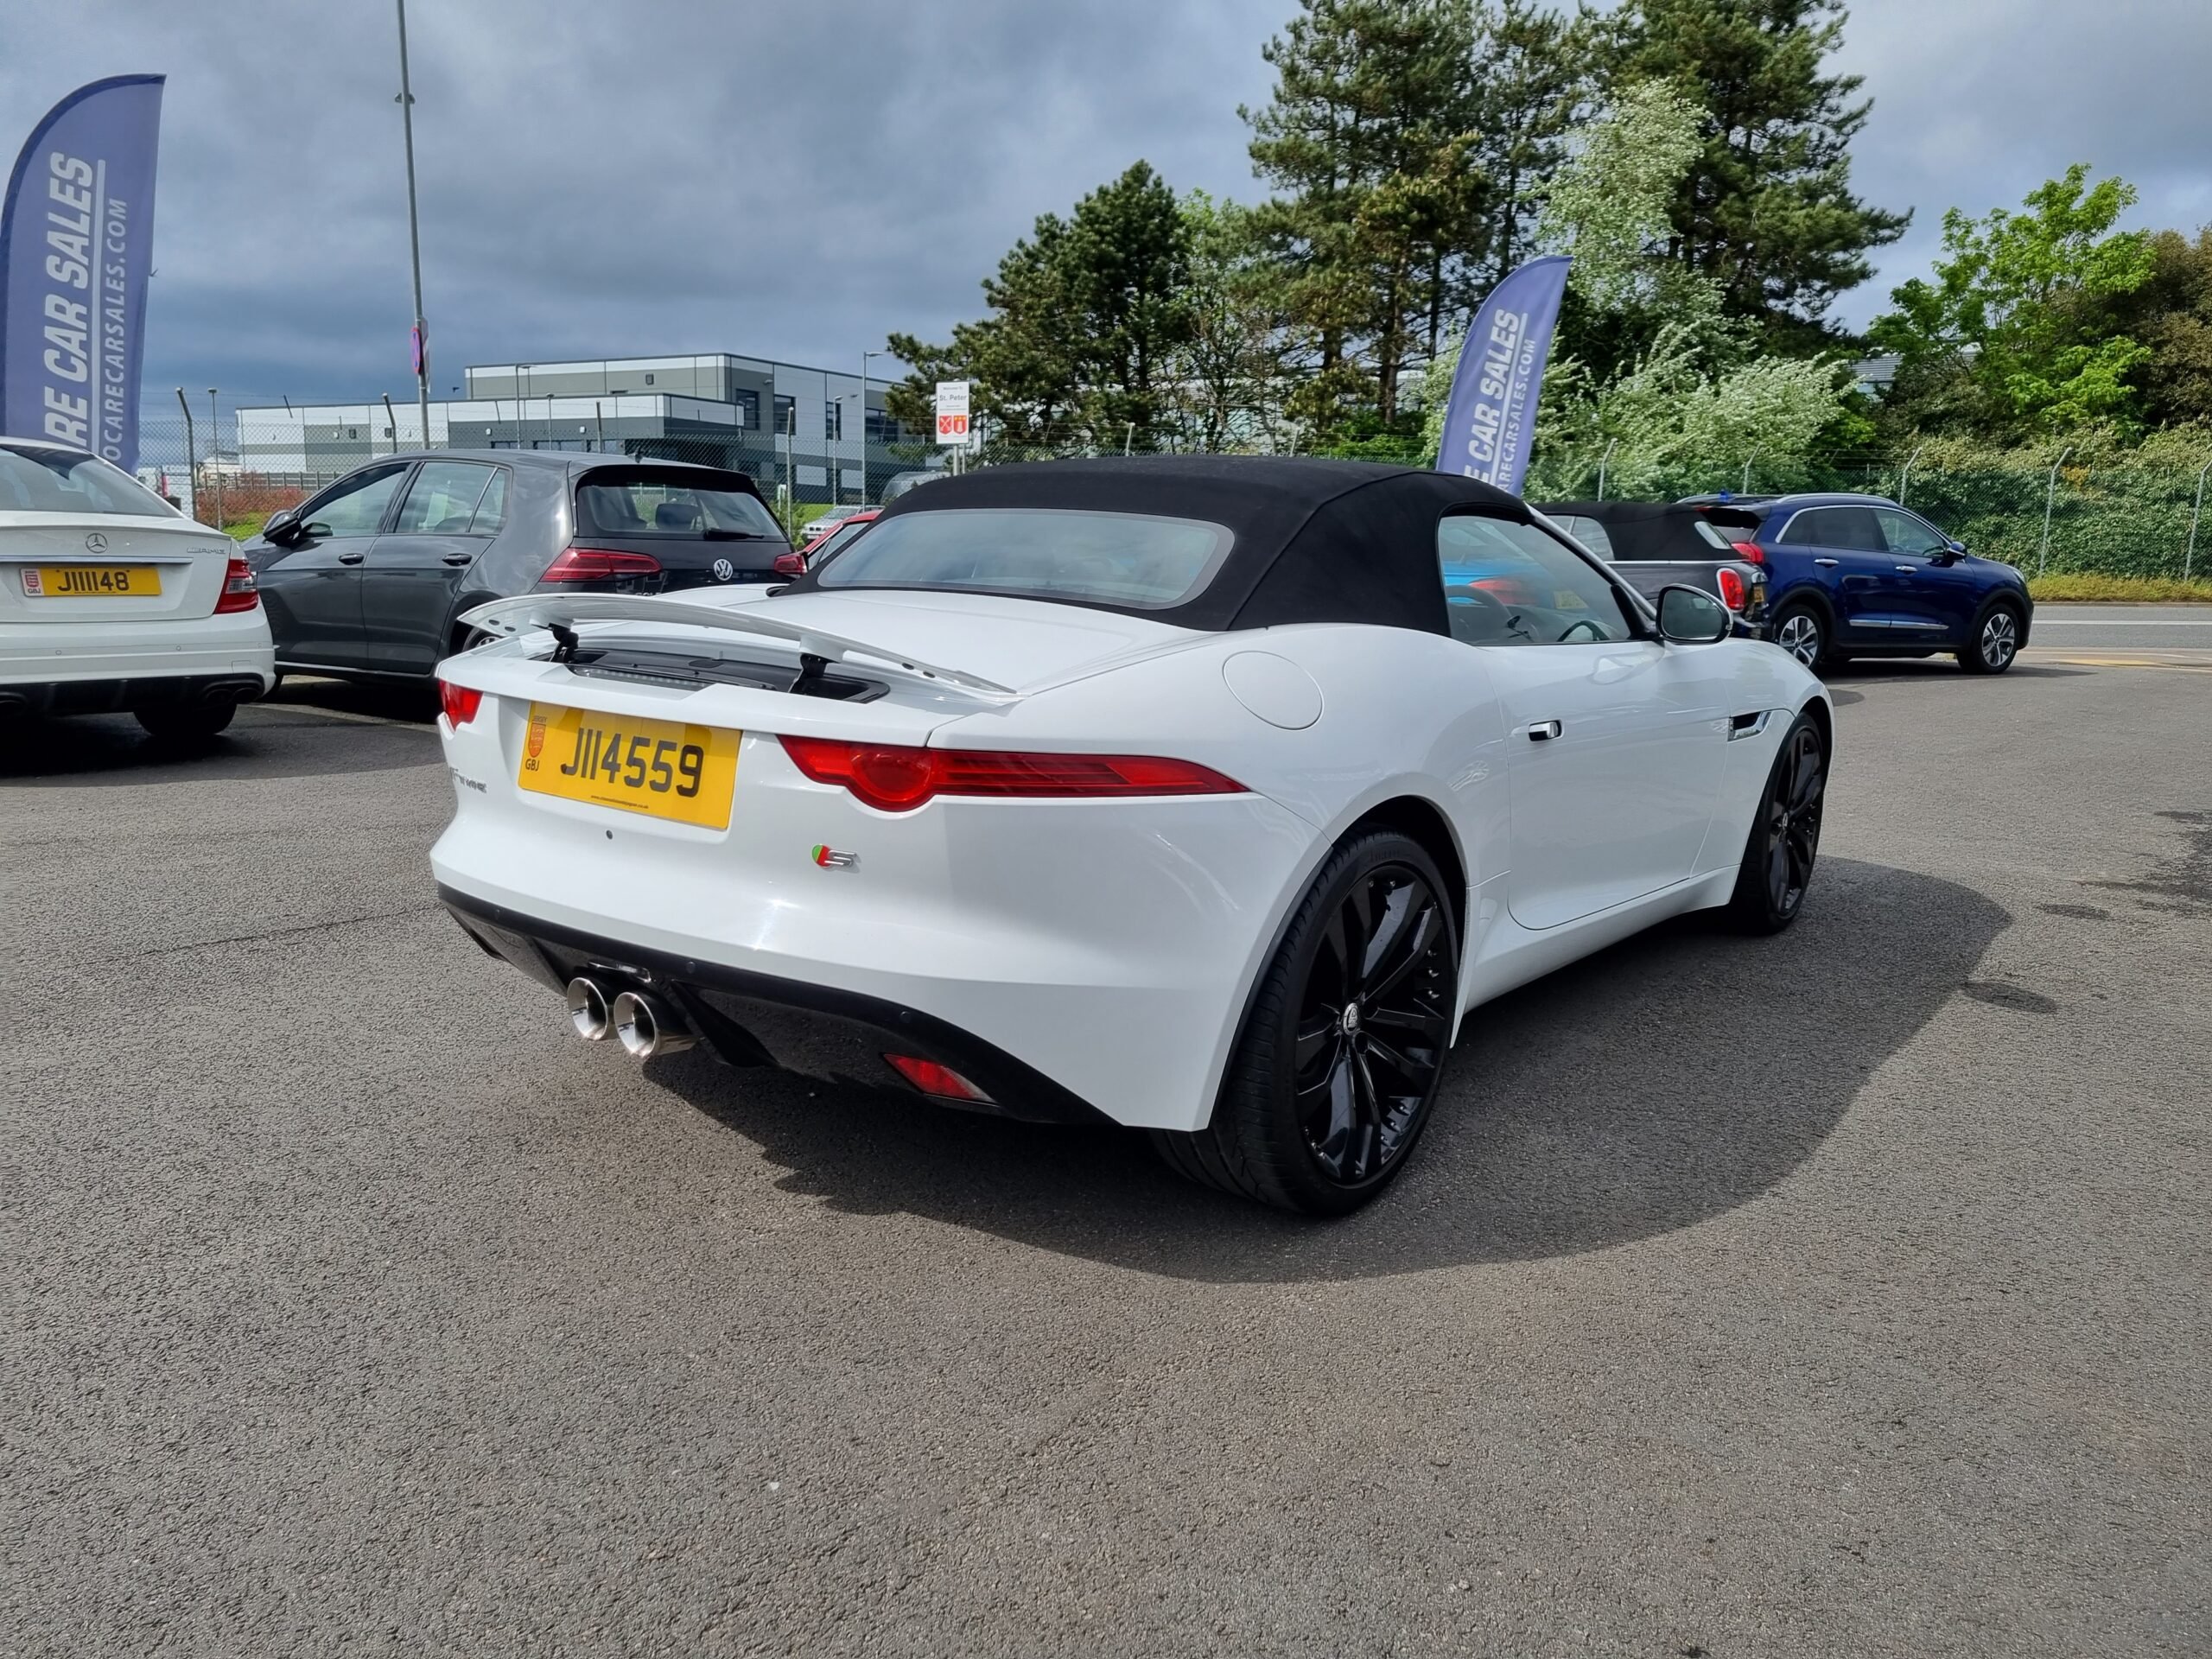 Reduced2014 Jaguar F Type S 30 V6 375bhp Quickshift Automatic Only 6300 Milesconvertiblevery Nice Examplenow Only 29995 7